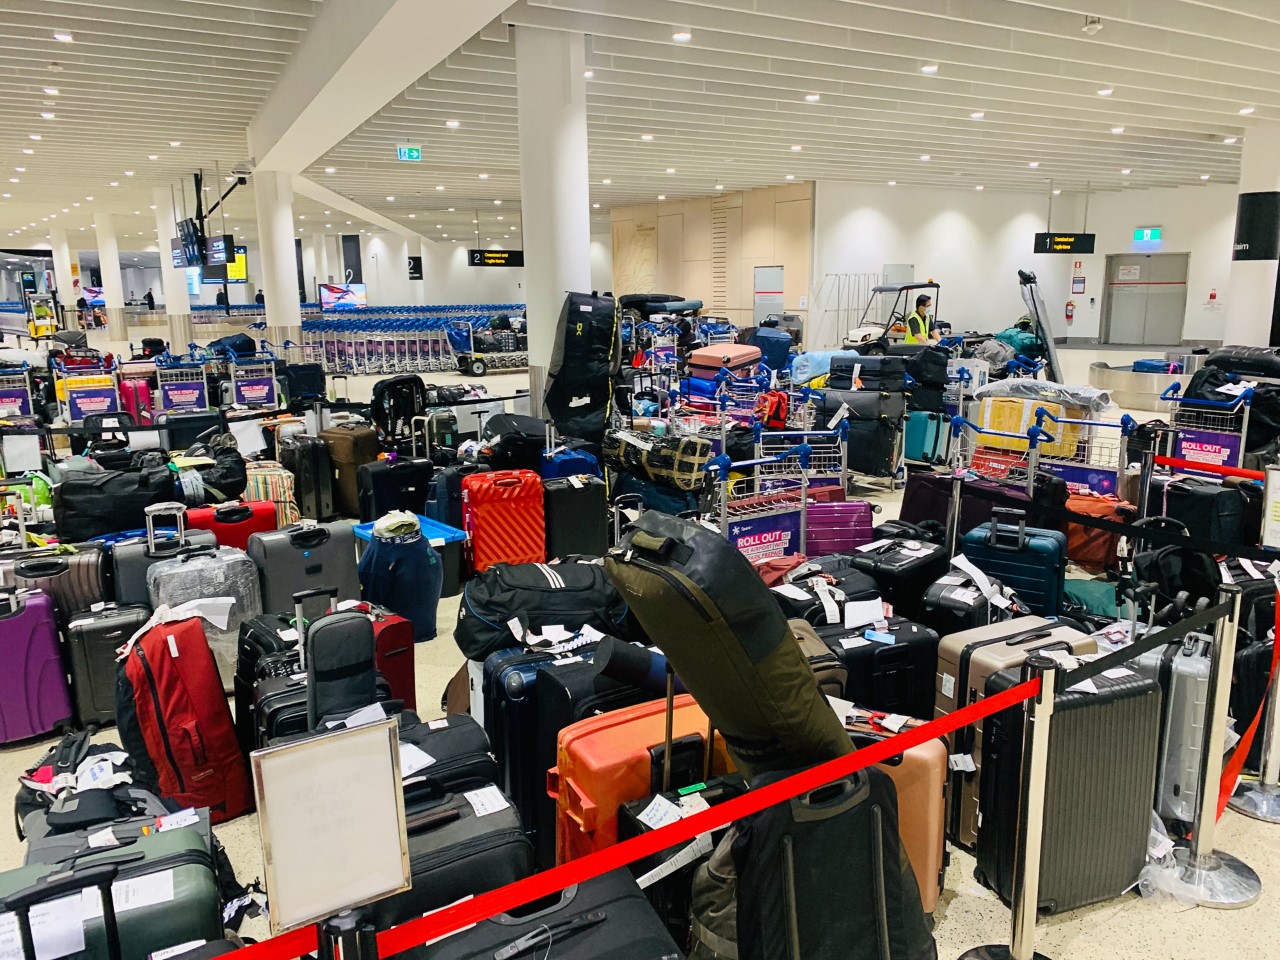 Airlines Sell Lost Luggage